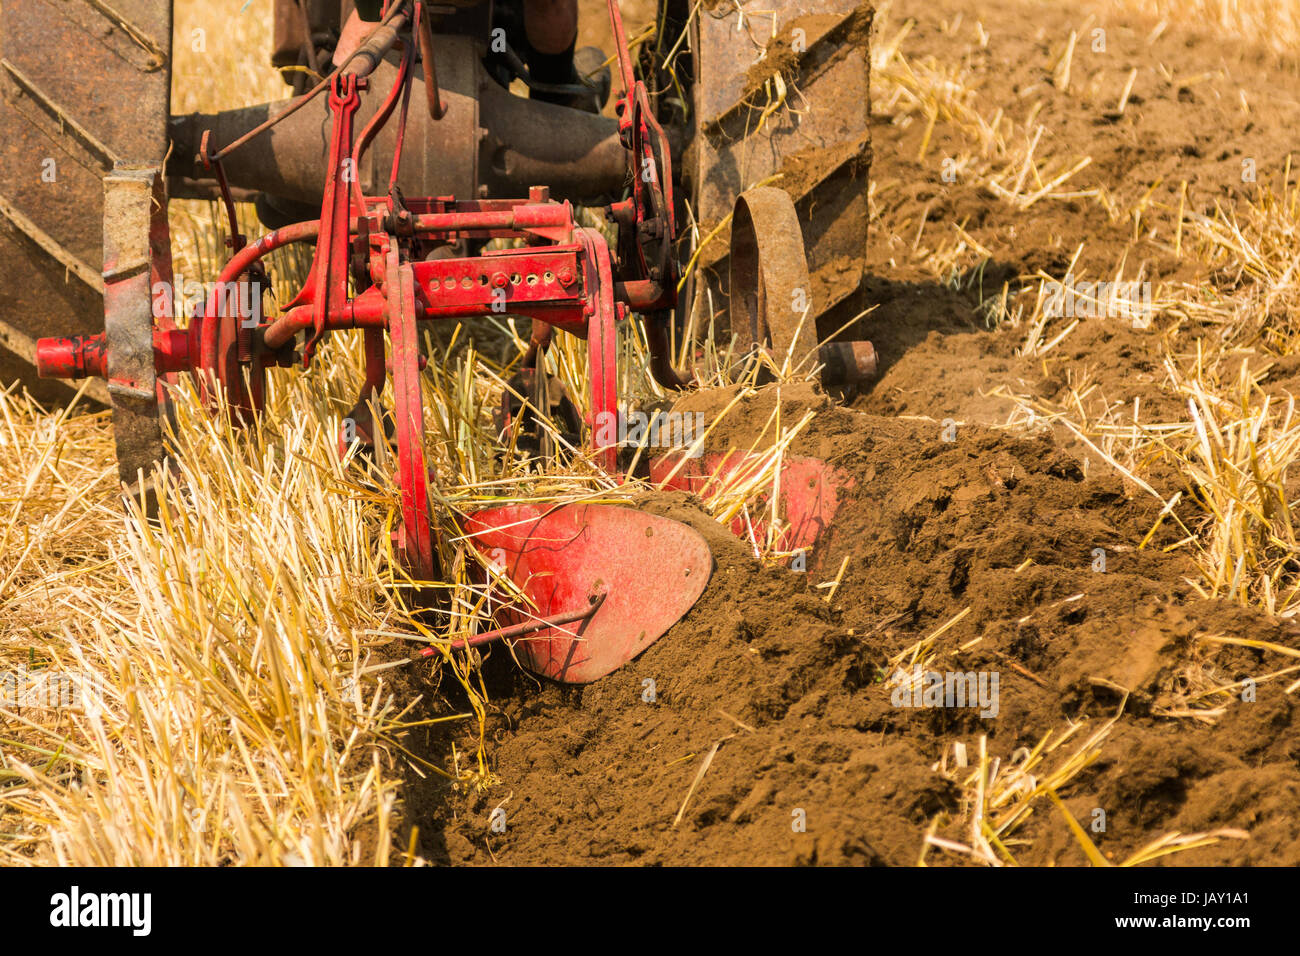 On vintage red plough turning over the soil. Stock Photo